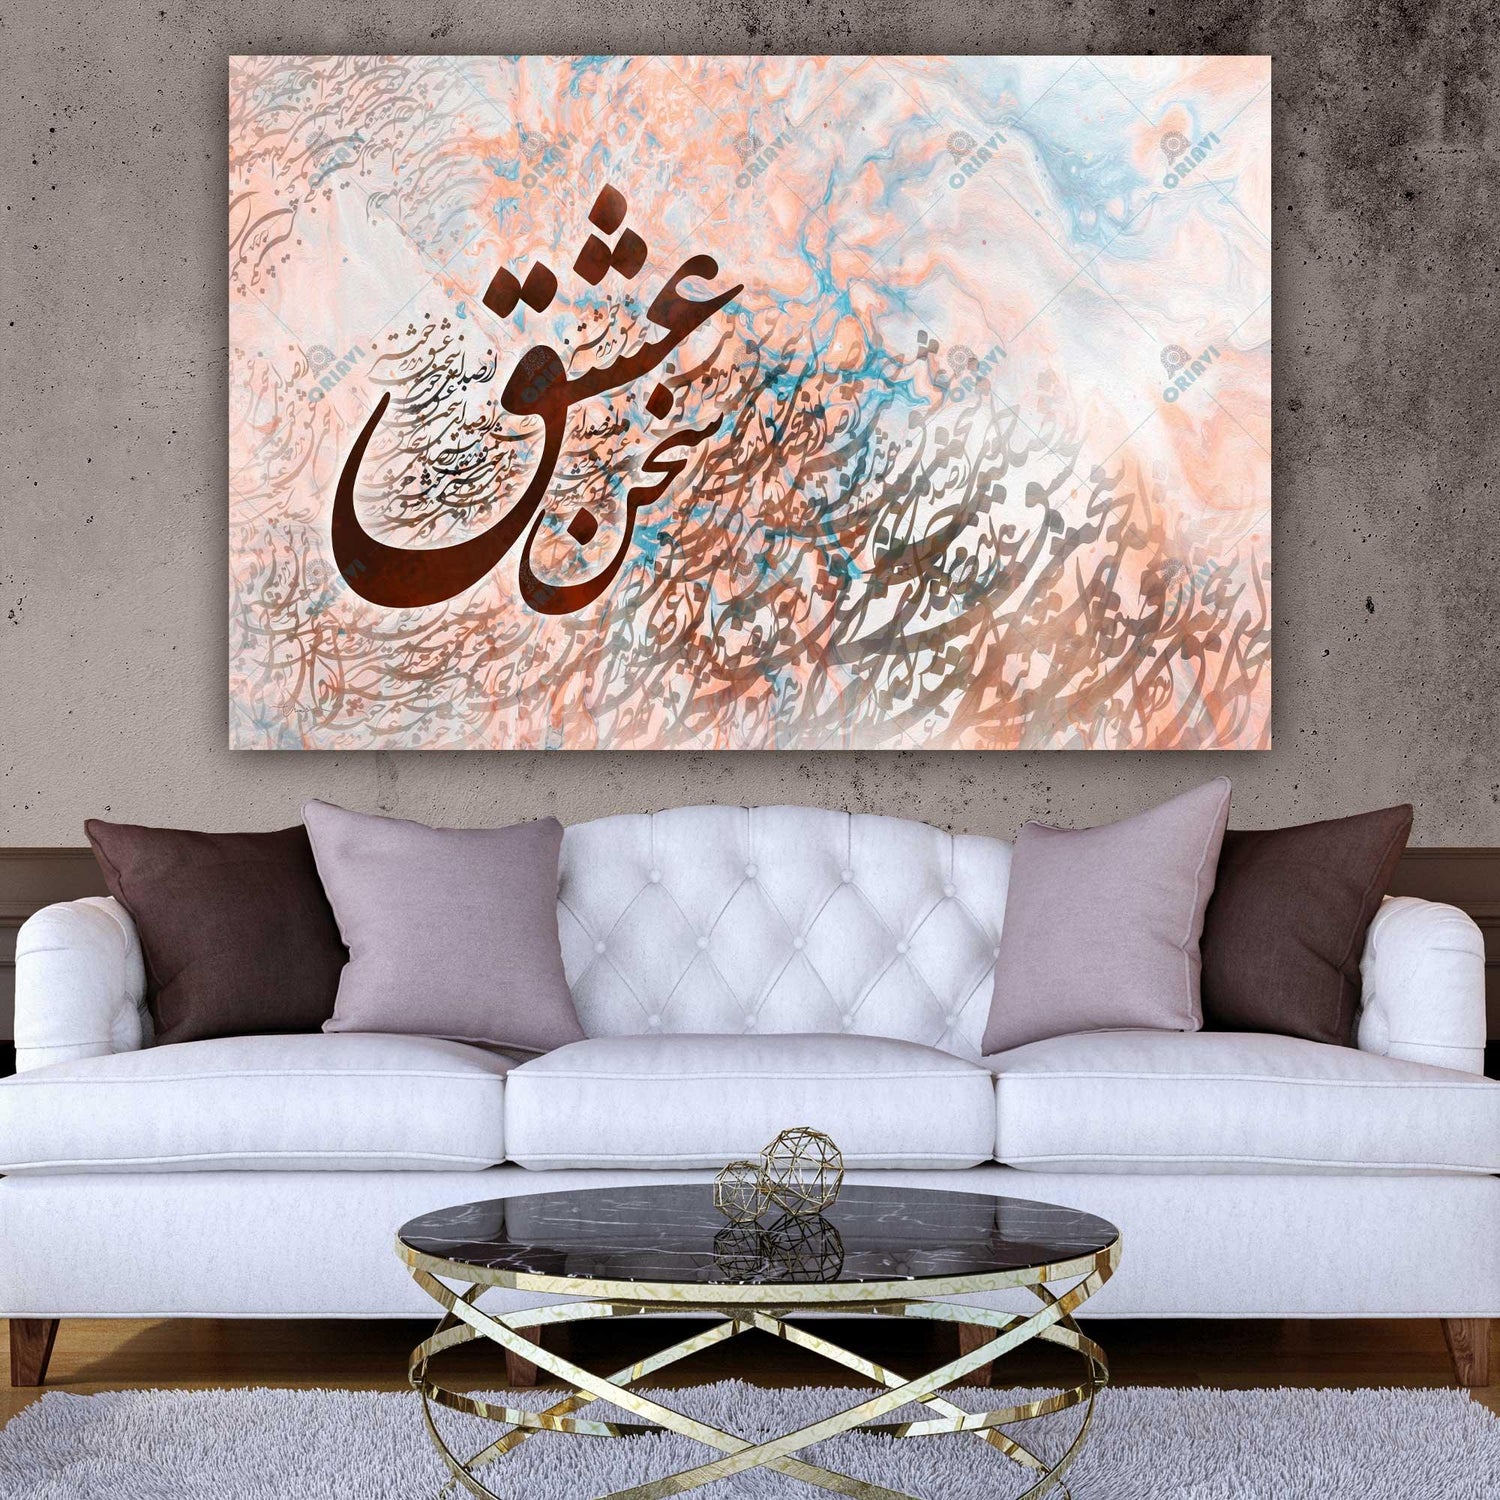 The Voice of LOVE | Persian Calligraphy Wall Art - ORIAVI Persian Art, persian artwork for sale, persian calligraphy, persian calligraphy wall art, persian mix media wall art, persian painting, persian wall art